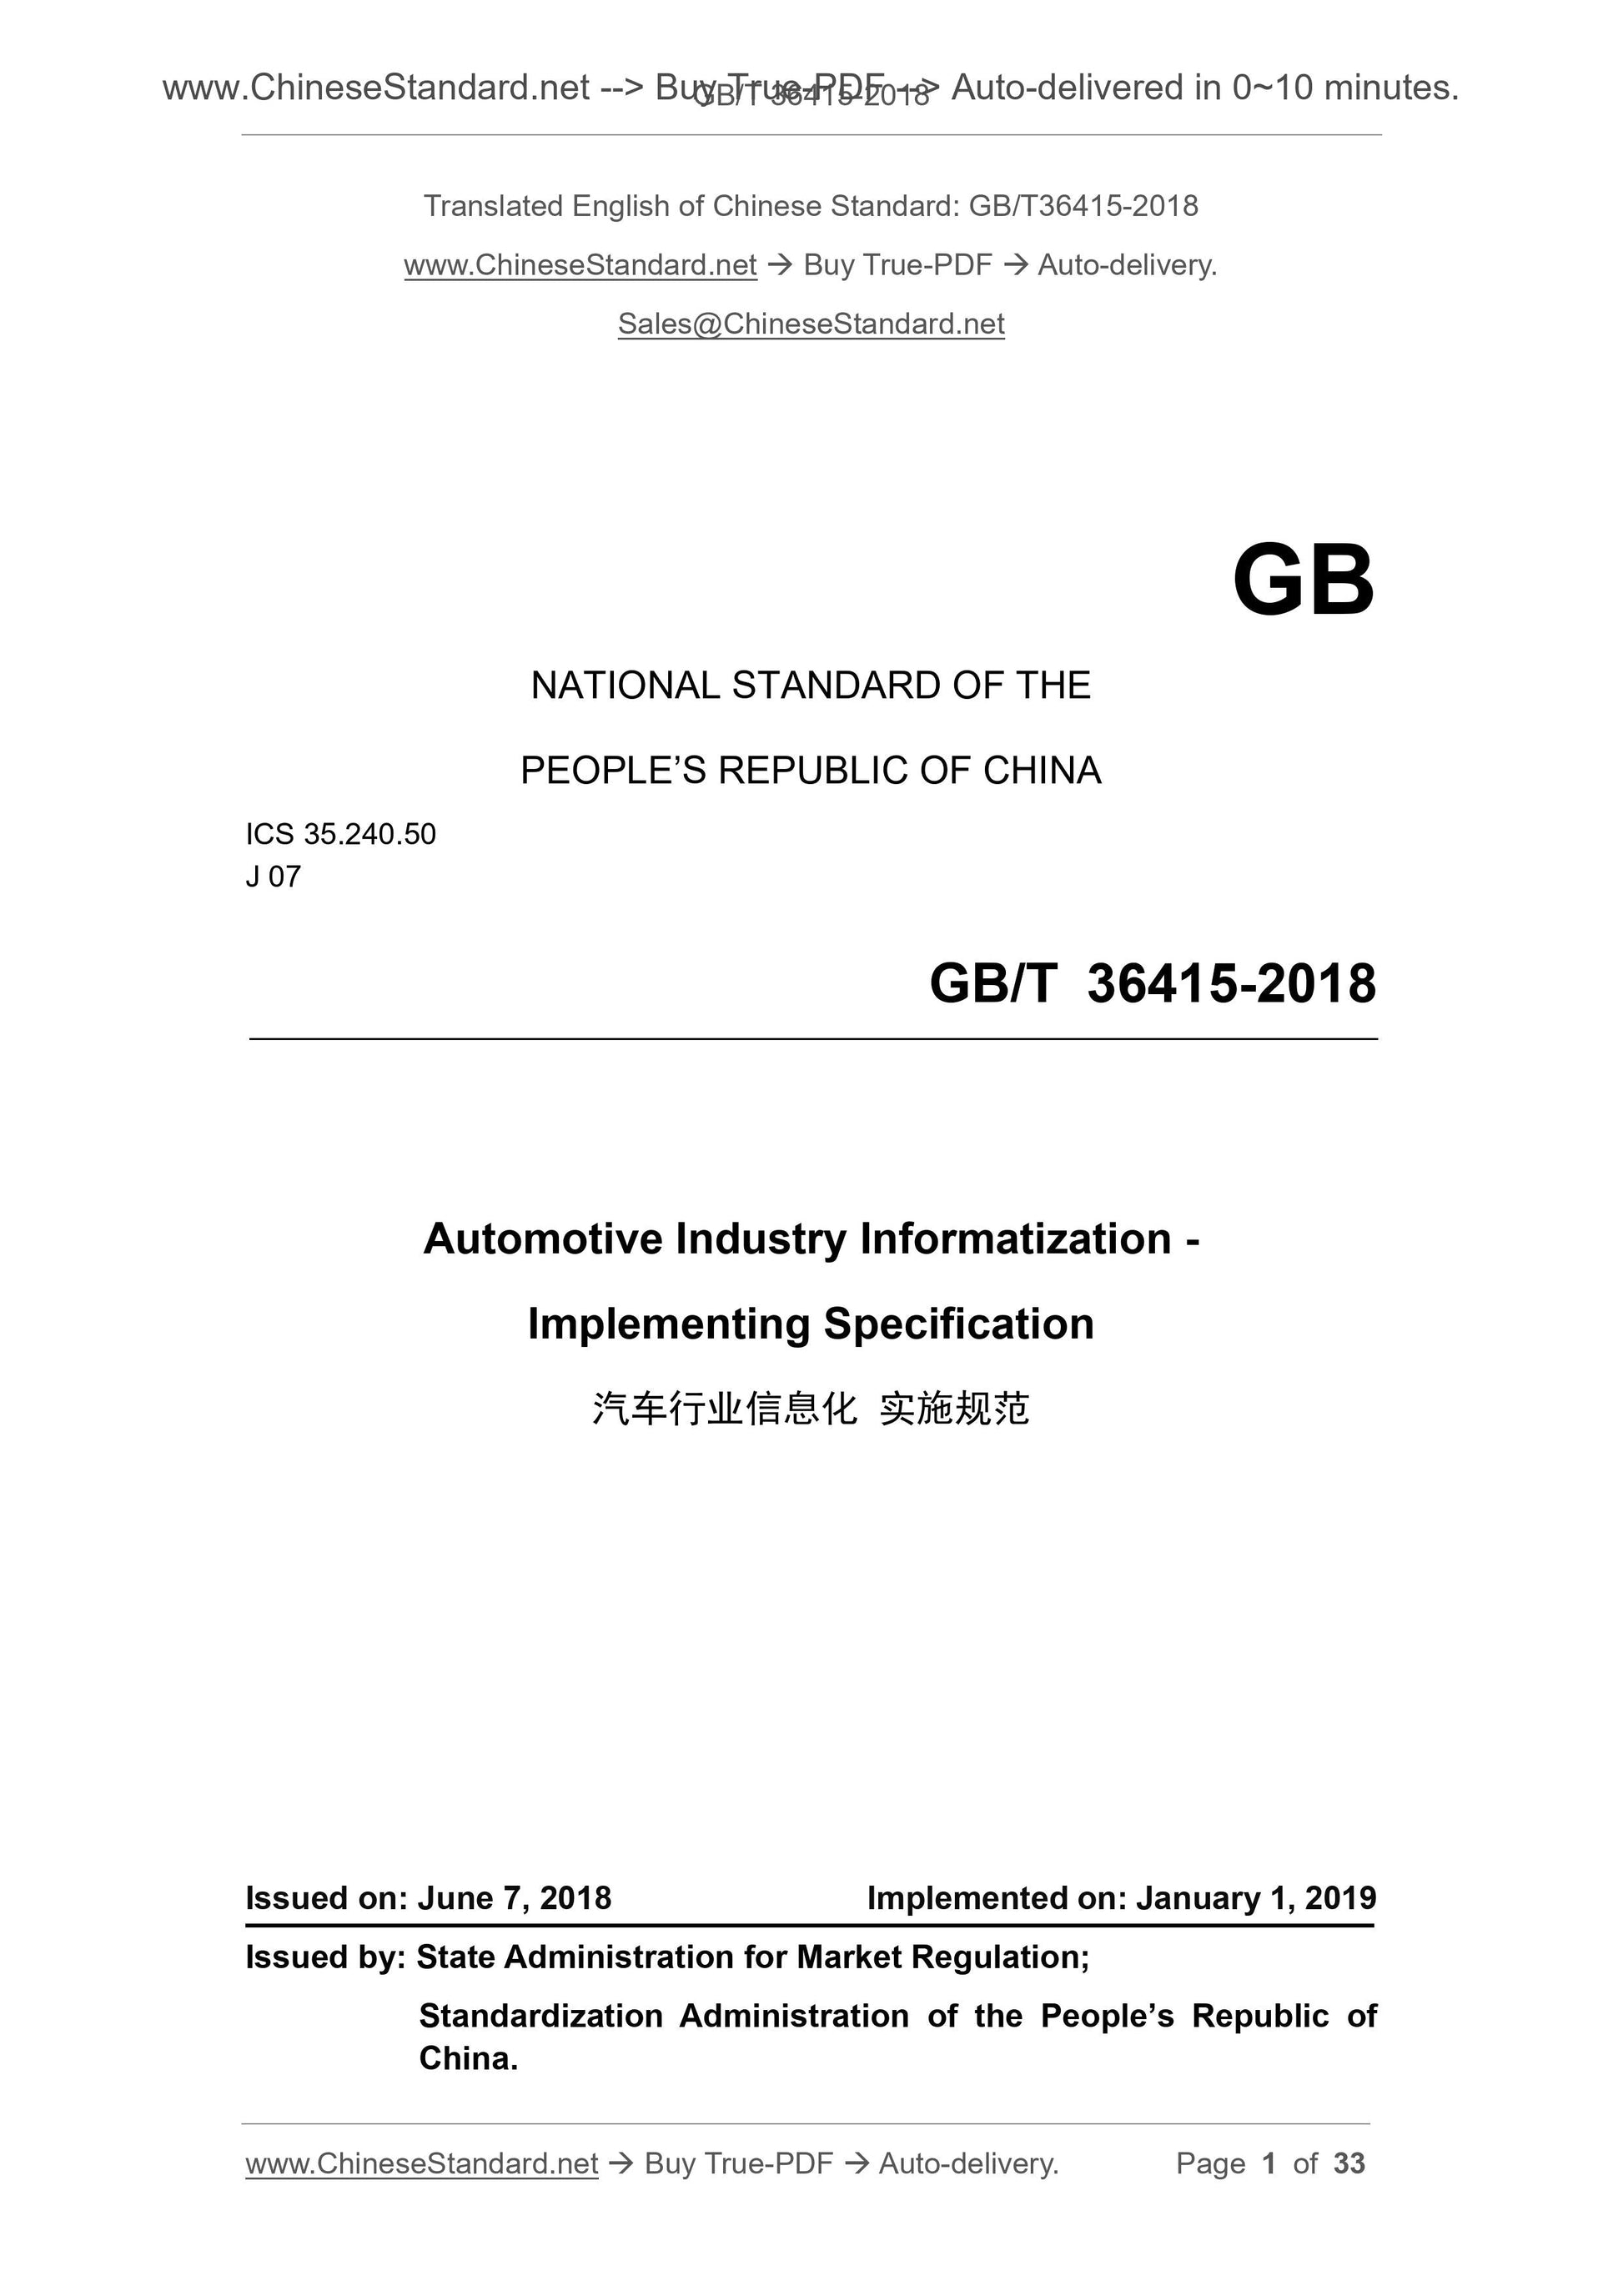 GB/T 36415-2018 Page 1